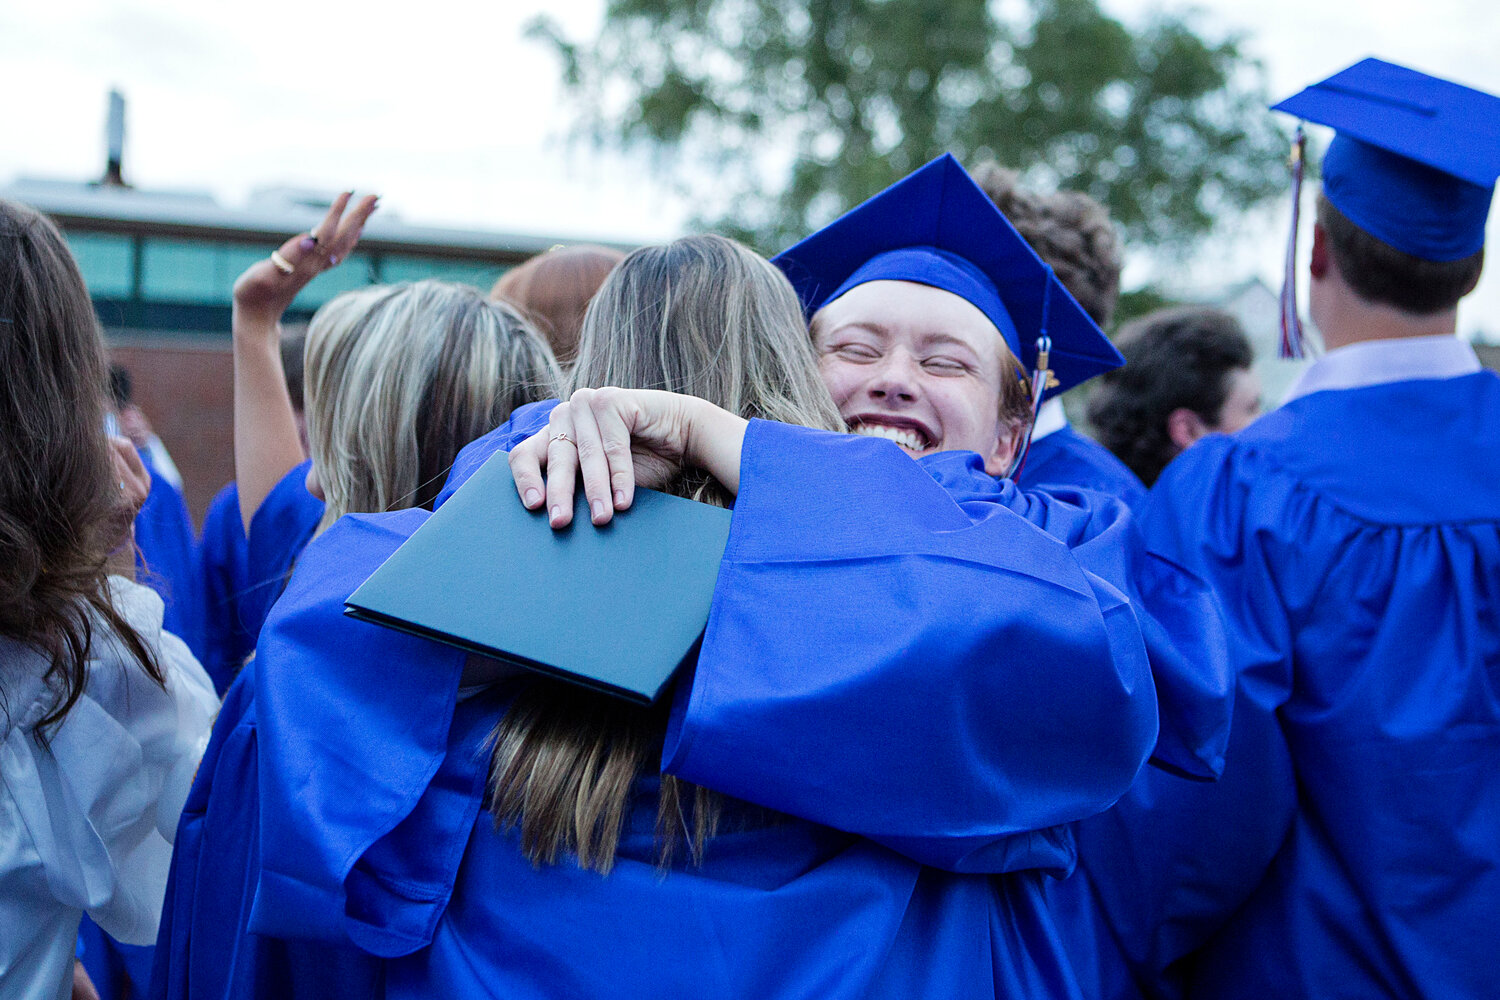 Jack Hollen gives a classmate a big squeeze following the ceremony.